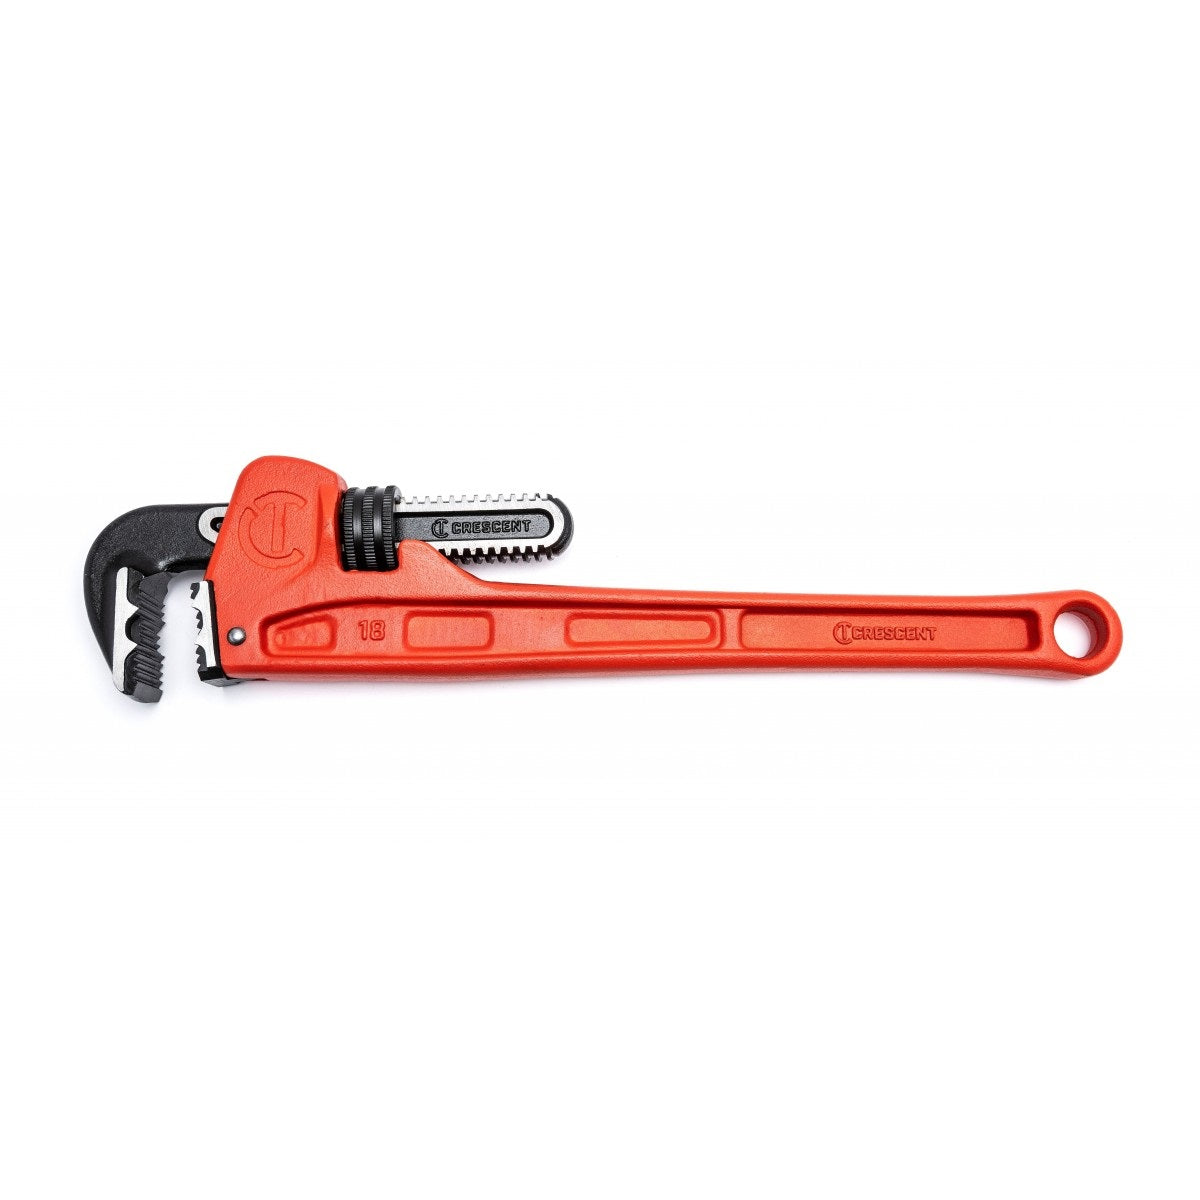 Crescent CIPW18 K9 Jaw Pipe Wrench, Cast Iron